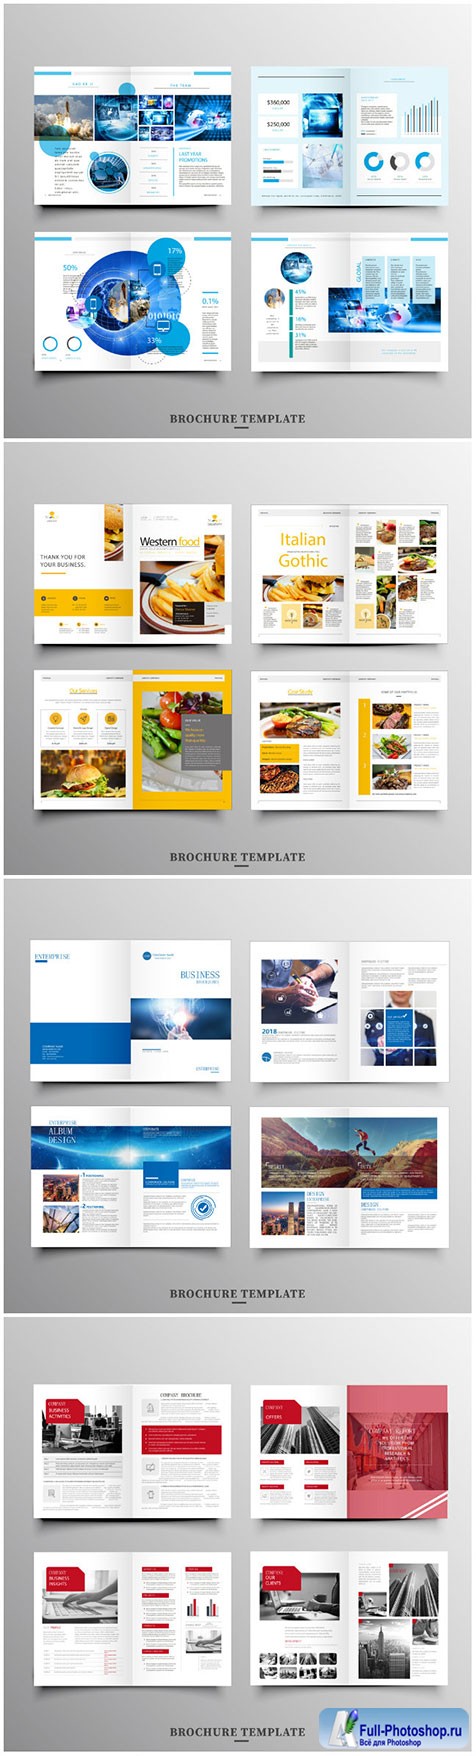 Brochure template vector layout design, corporate business annual report, magazine, flyer mockup # 243